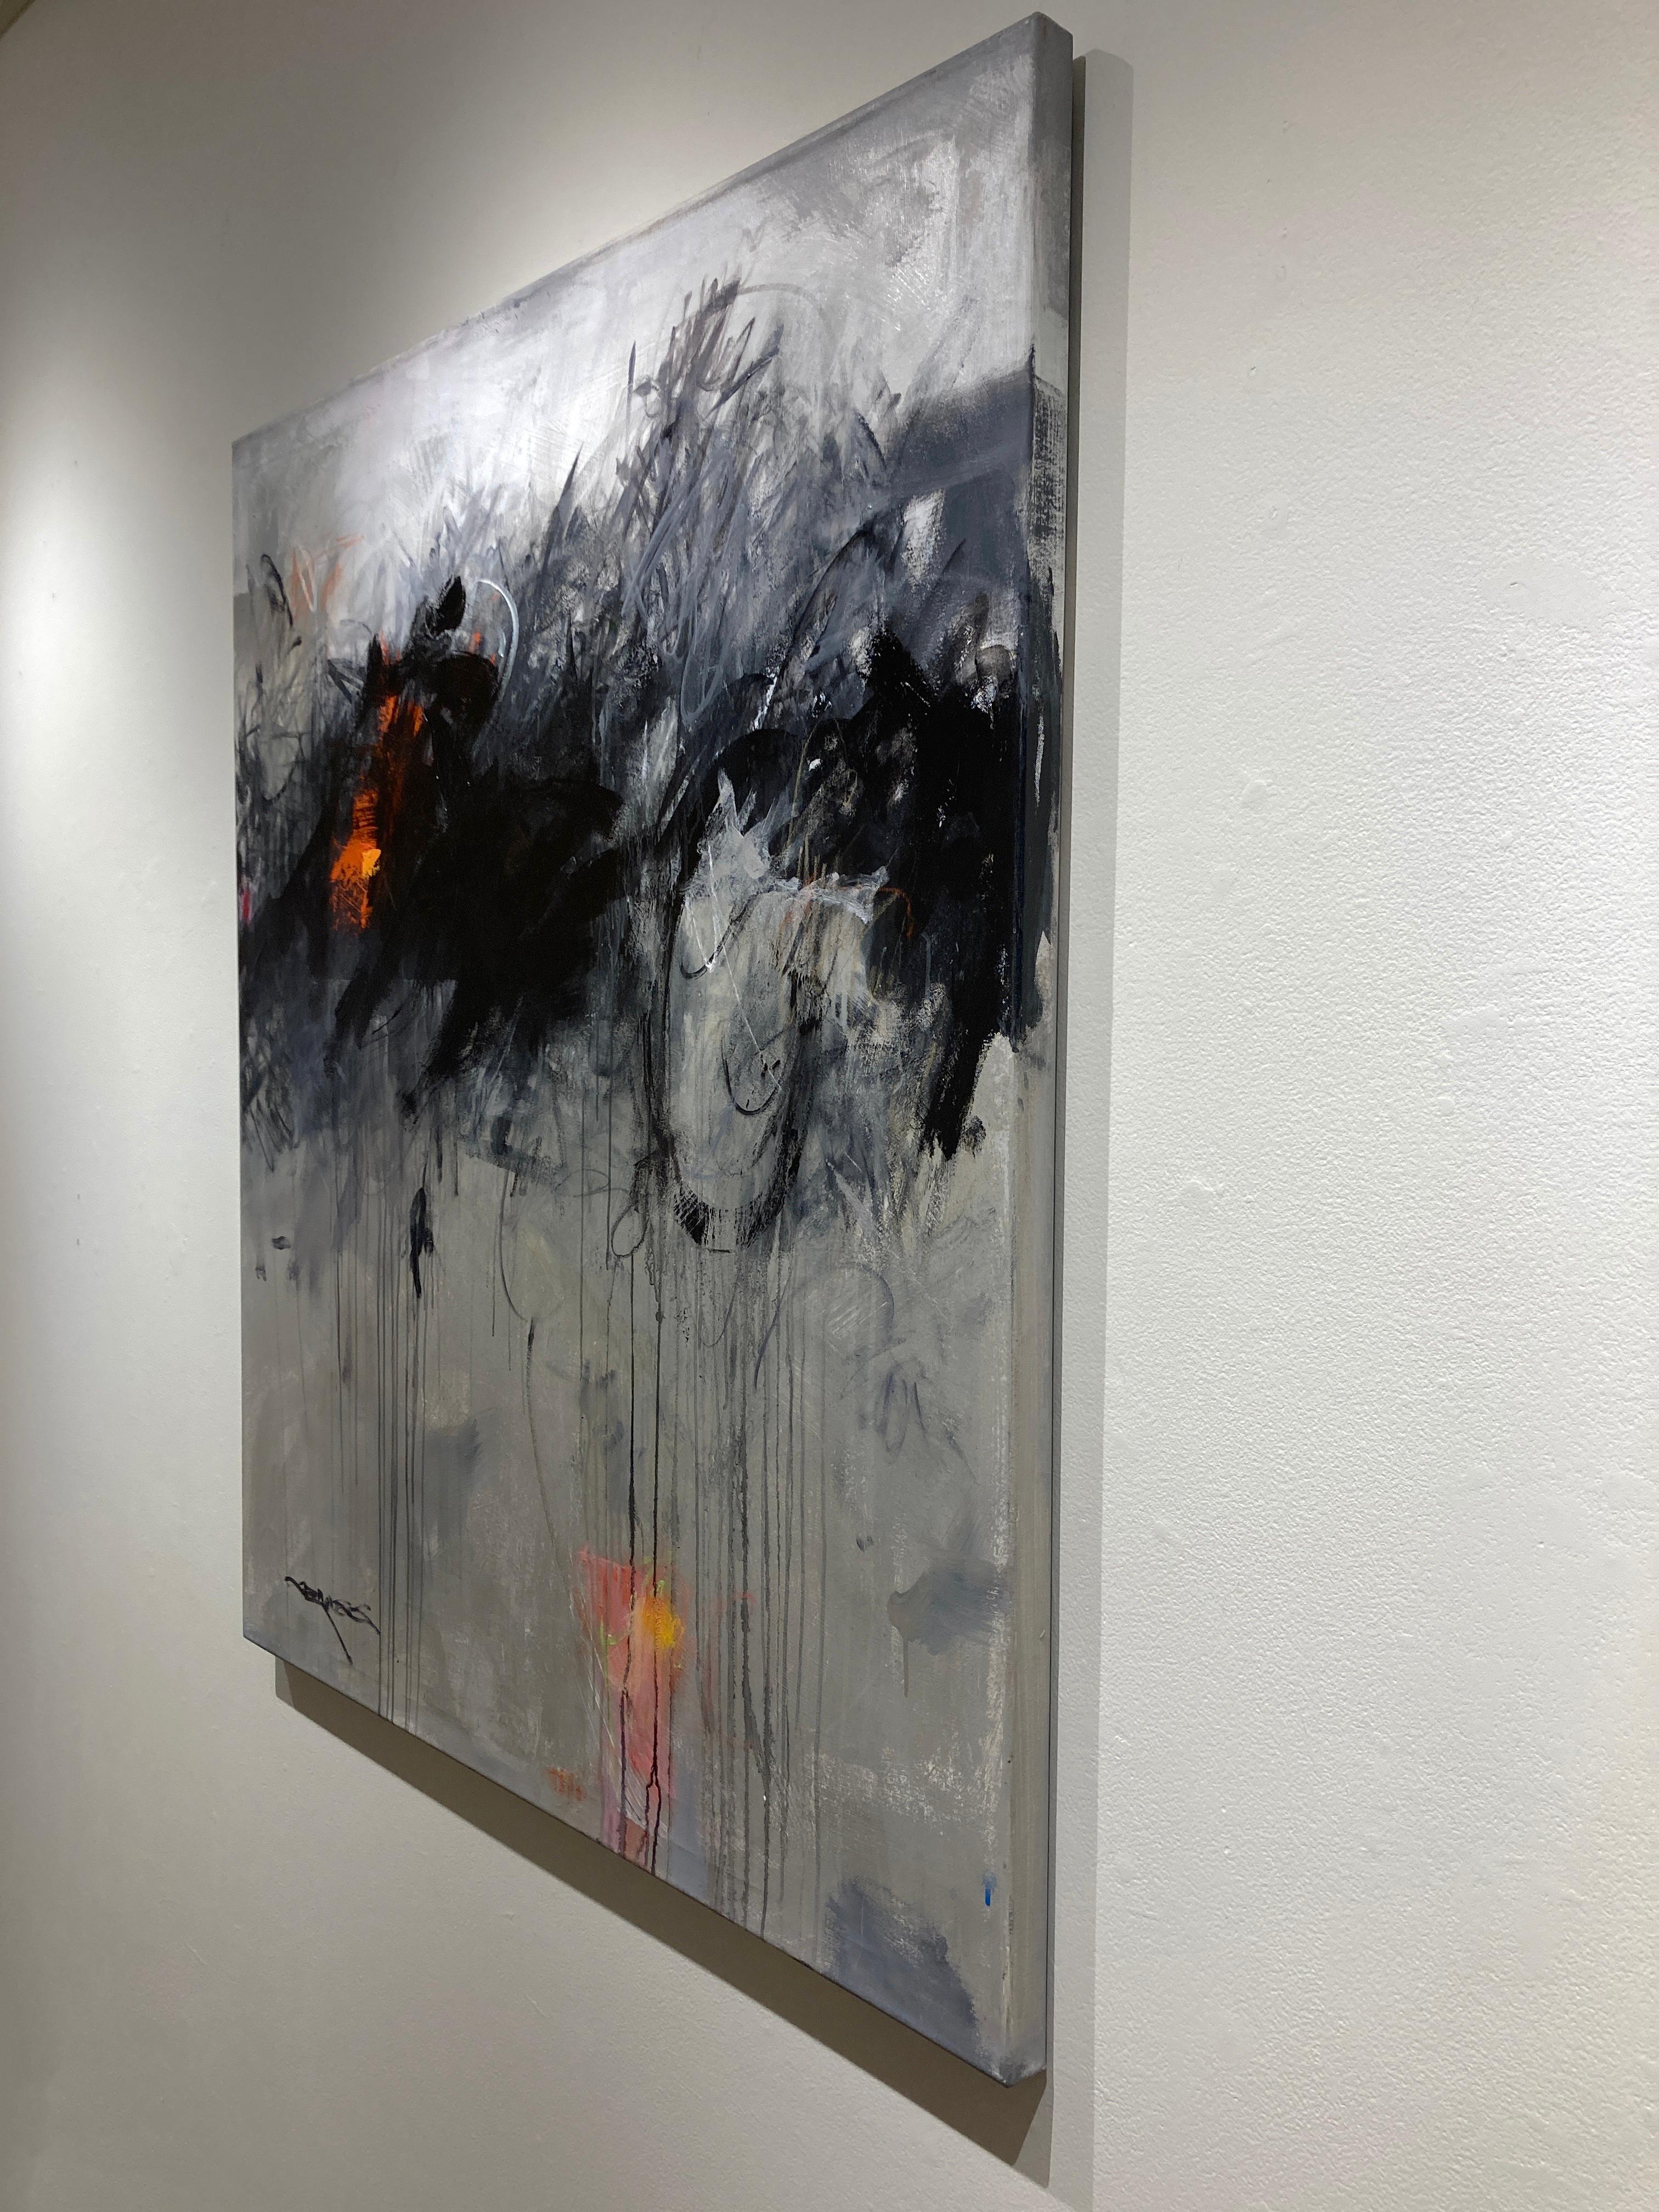 This dark abstract painting, 